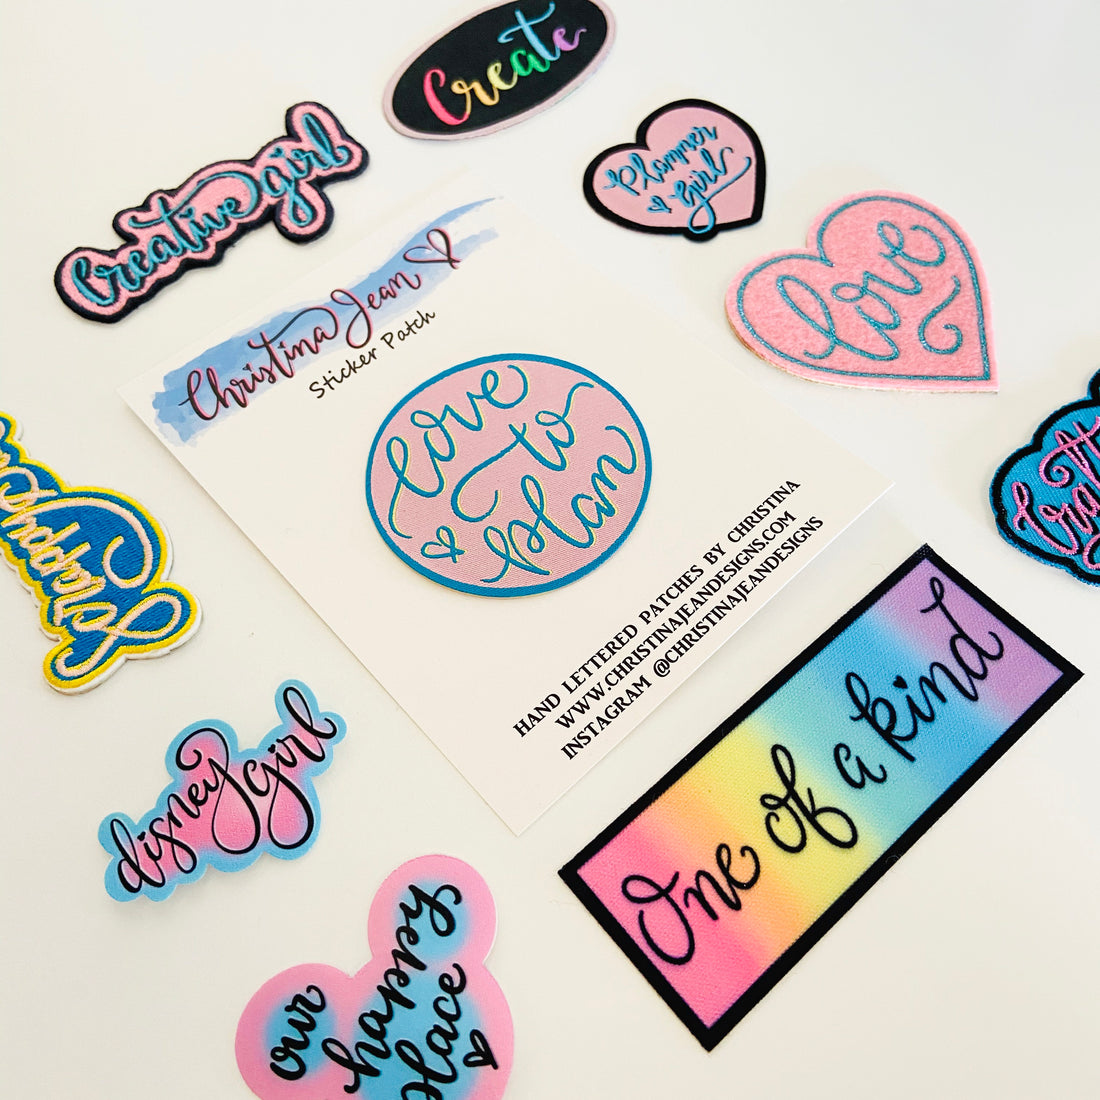 3 Reasons Why Sticker Patches are the BEST!